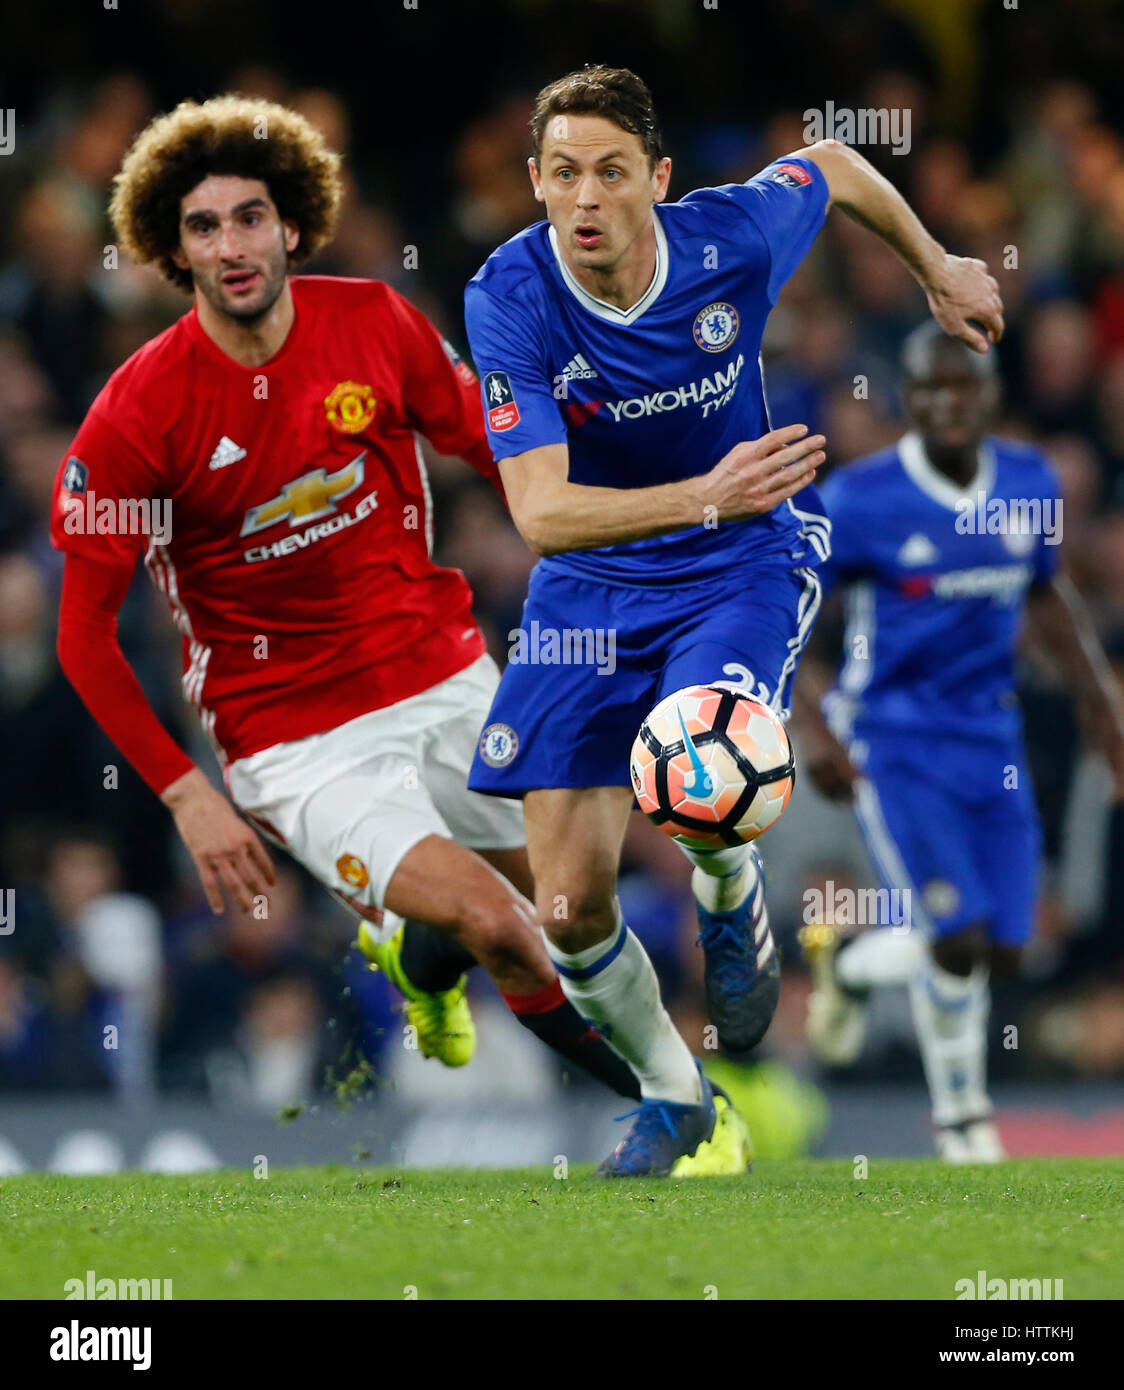 Nemanja Matic of Chelsea and Marouane Fellaini of Manchester United during the FA Cup match between Chelsea and Manchester United at Stamford Bridge in London. March 13, 2017. James Boardman / Telephoto Images +44 7967 642437 Stock Photo